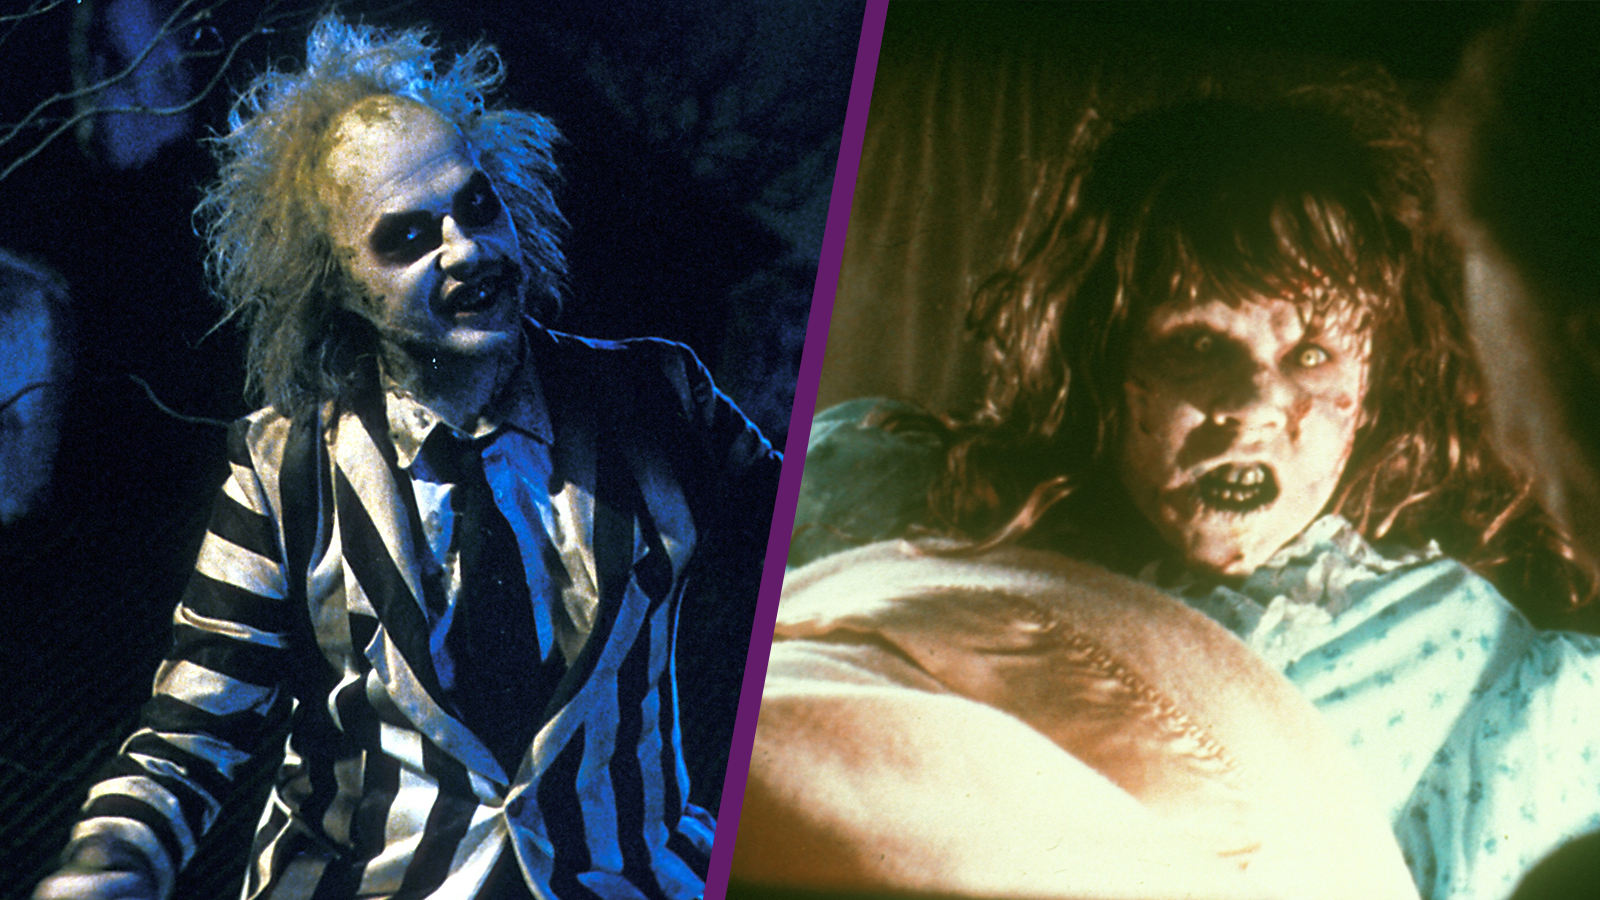 Beetlejuice The exorcist double feature